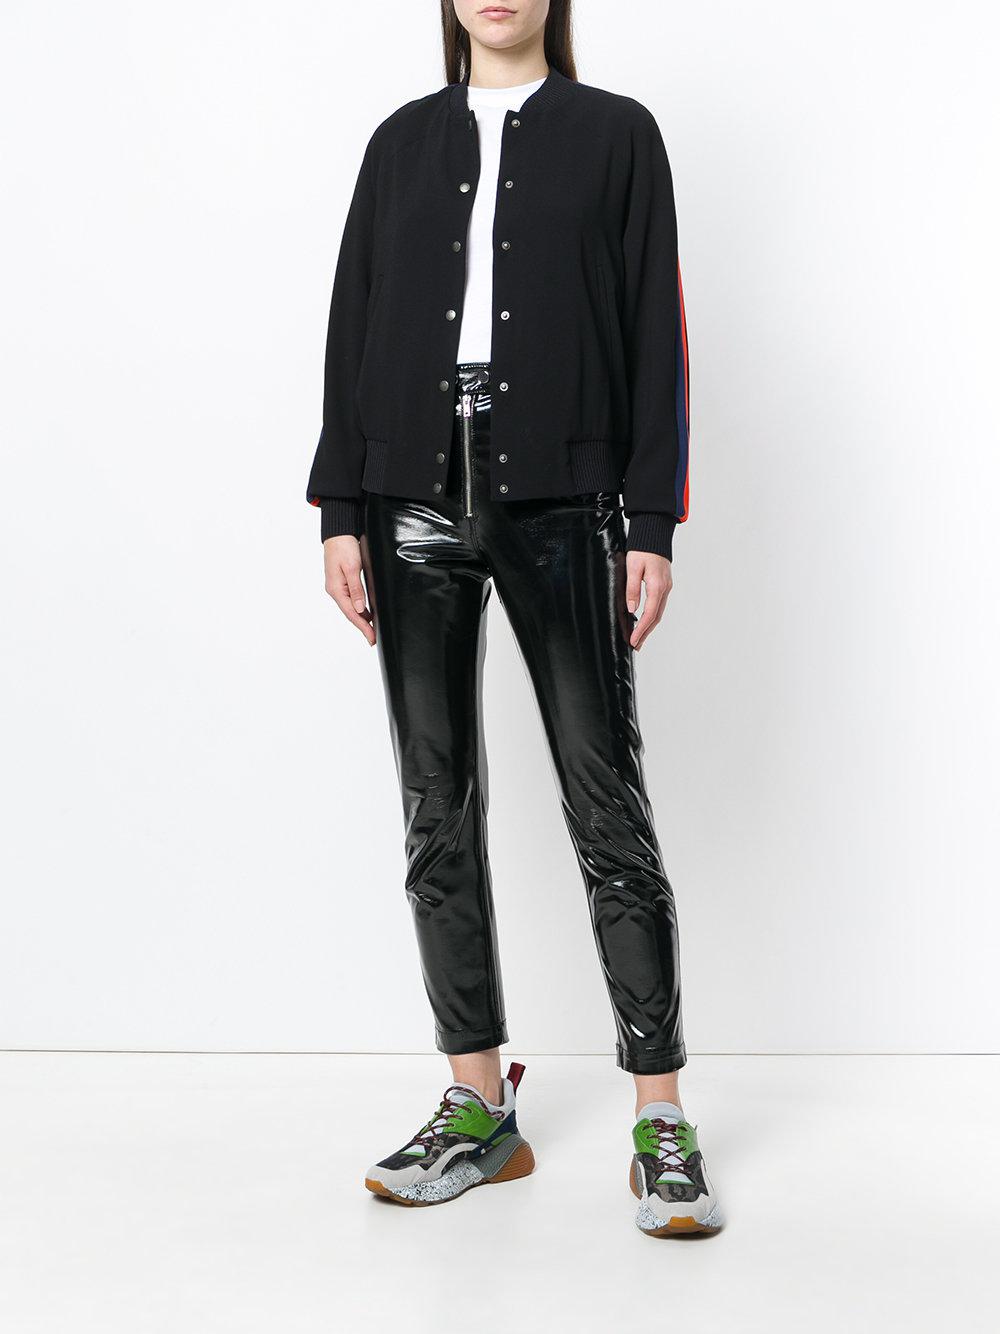 KENZO Synthetic Tiger Bomber Jacket in Black - Lyst